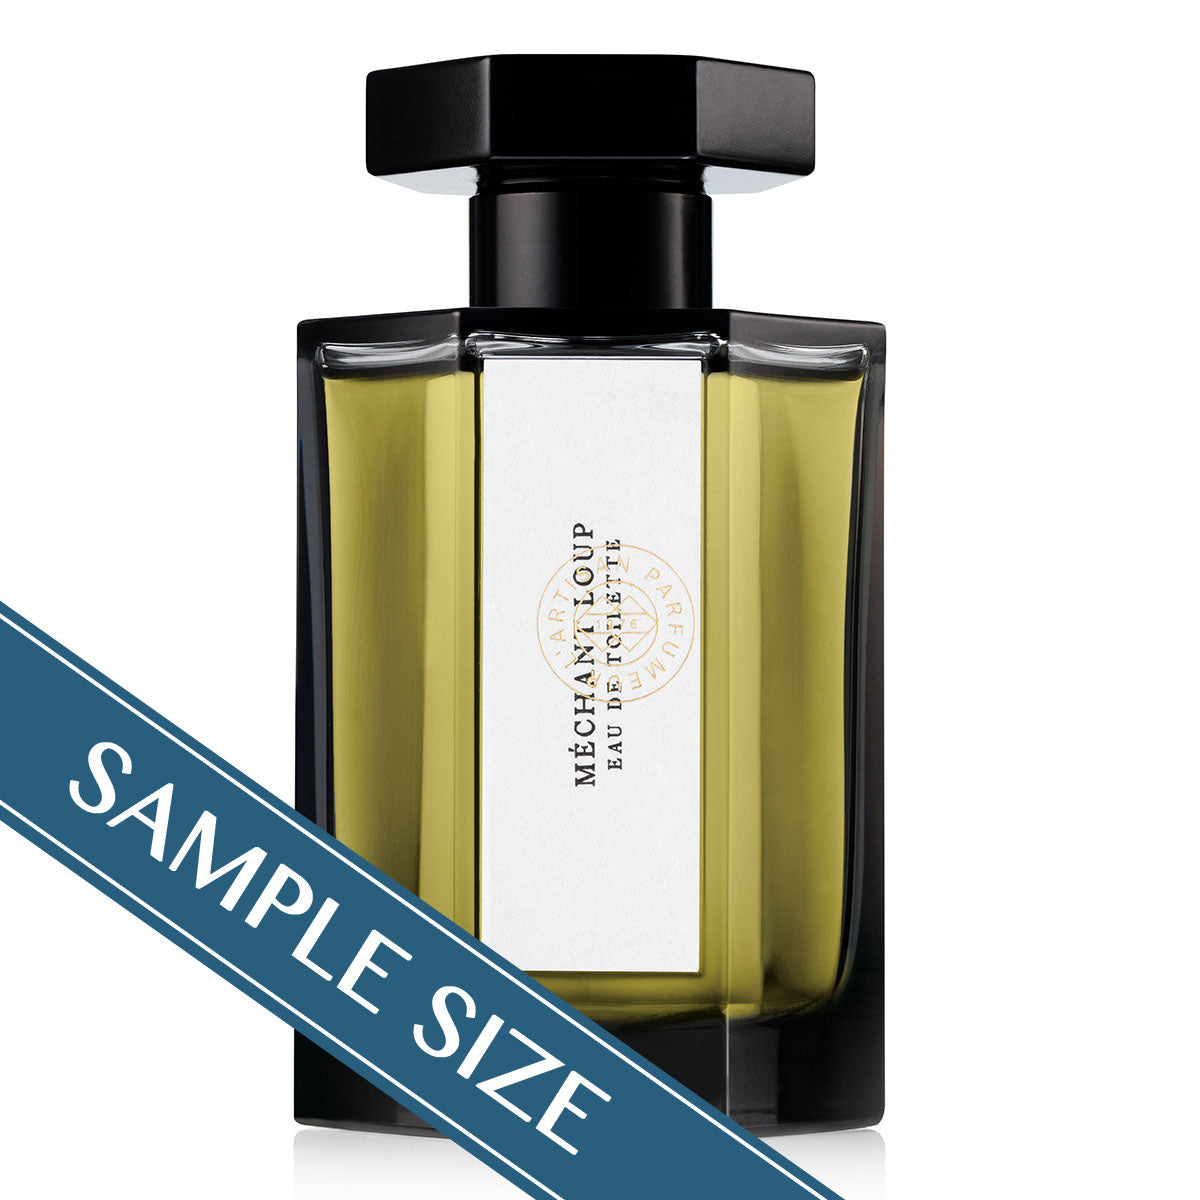 Primary image of Sample - Mechant Loup EDT